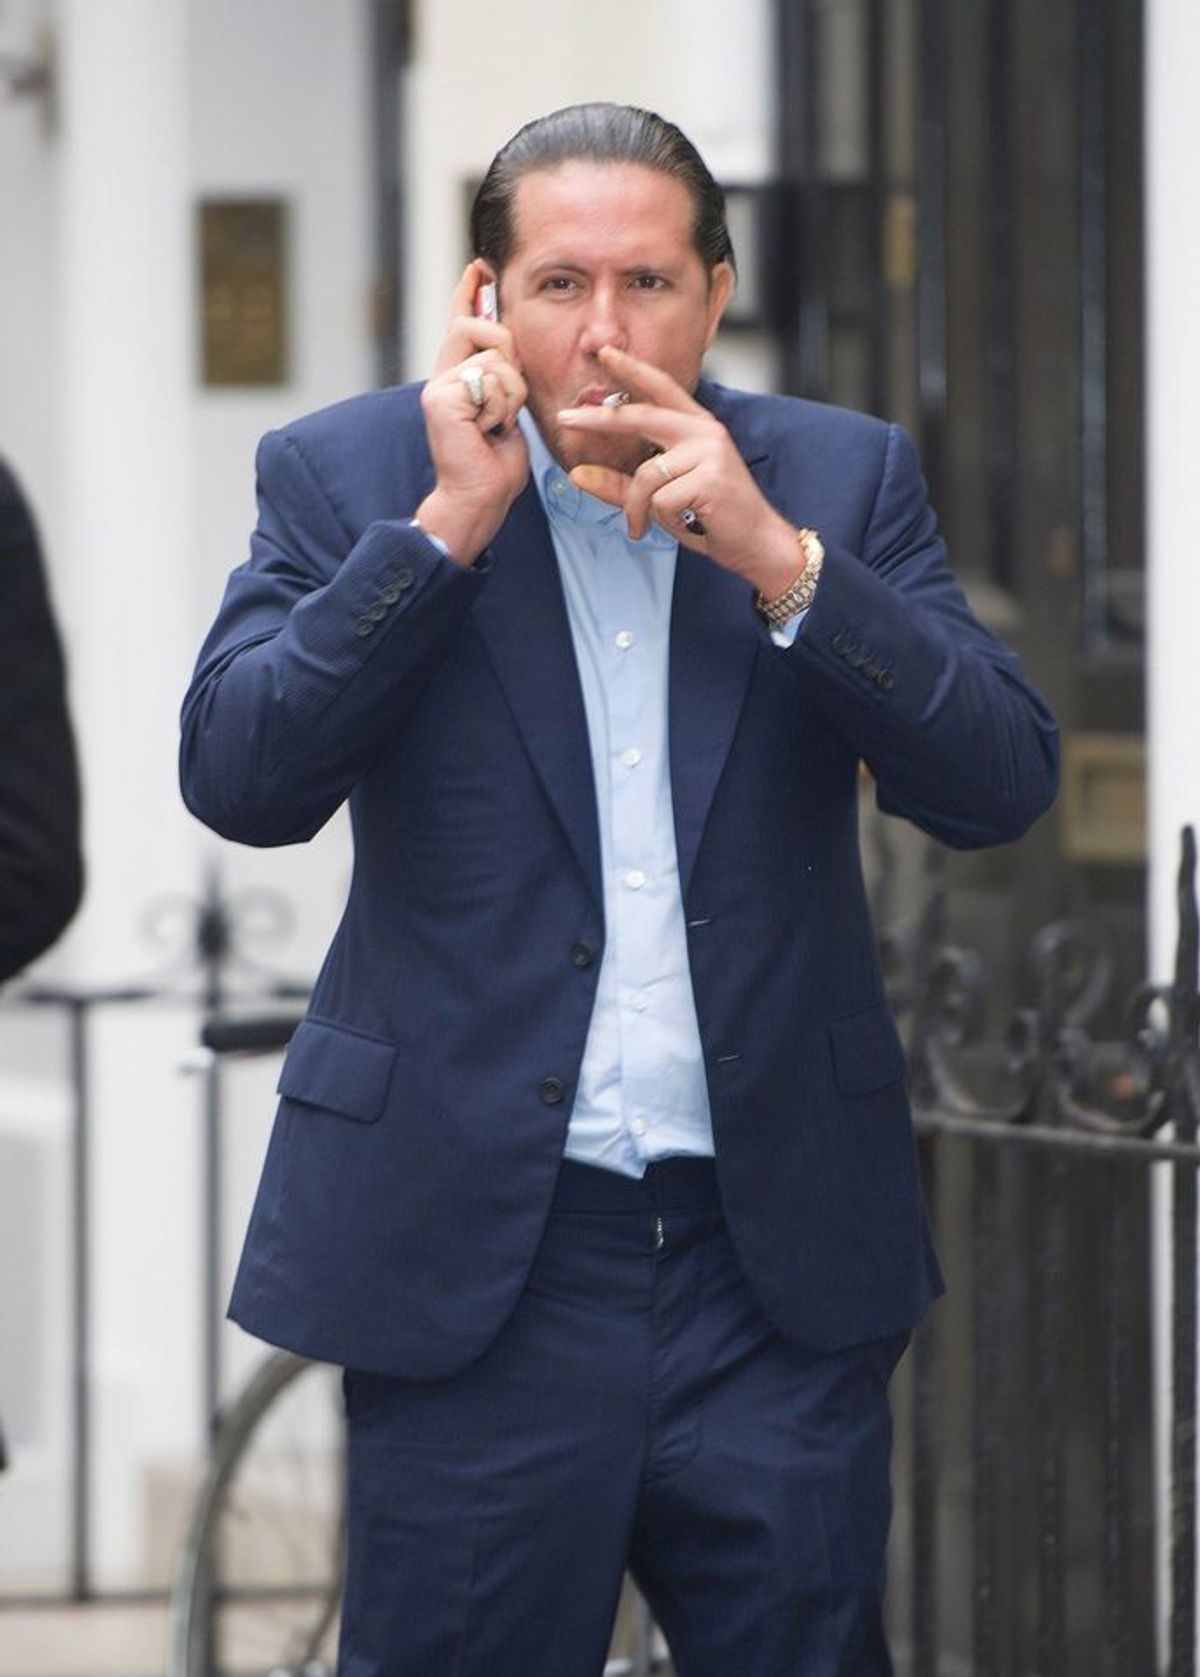 James Stunt, charged with money laundering and forgery © Rex Shutterstock/Georgie Gillard